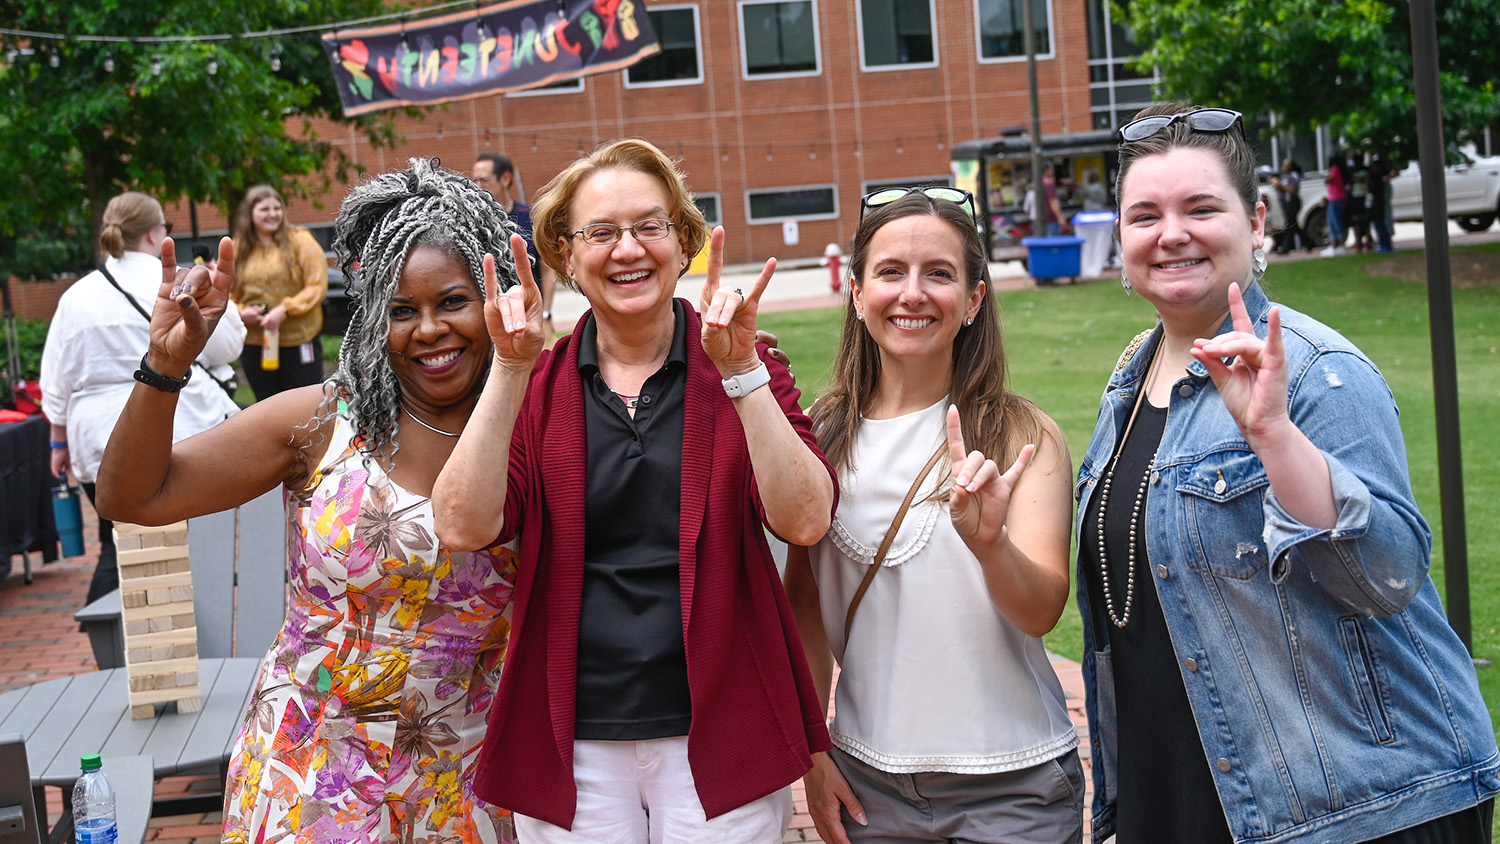 NC State's inaugural Juneteenth Celebration of freedom day focused on community, rest and celebration. Faculty, staff, and students gathered at Harris Field at the Witherspoon Student Center.